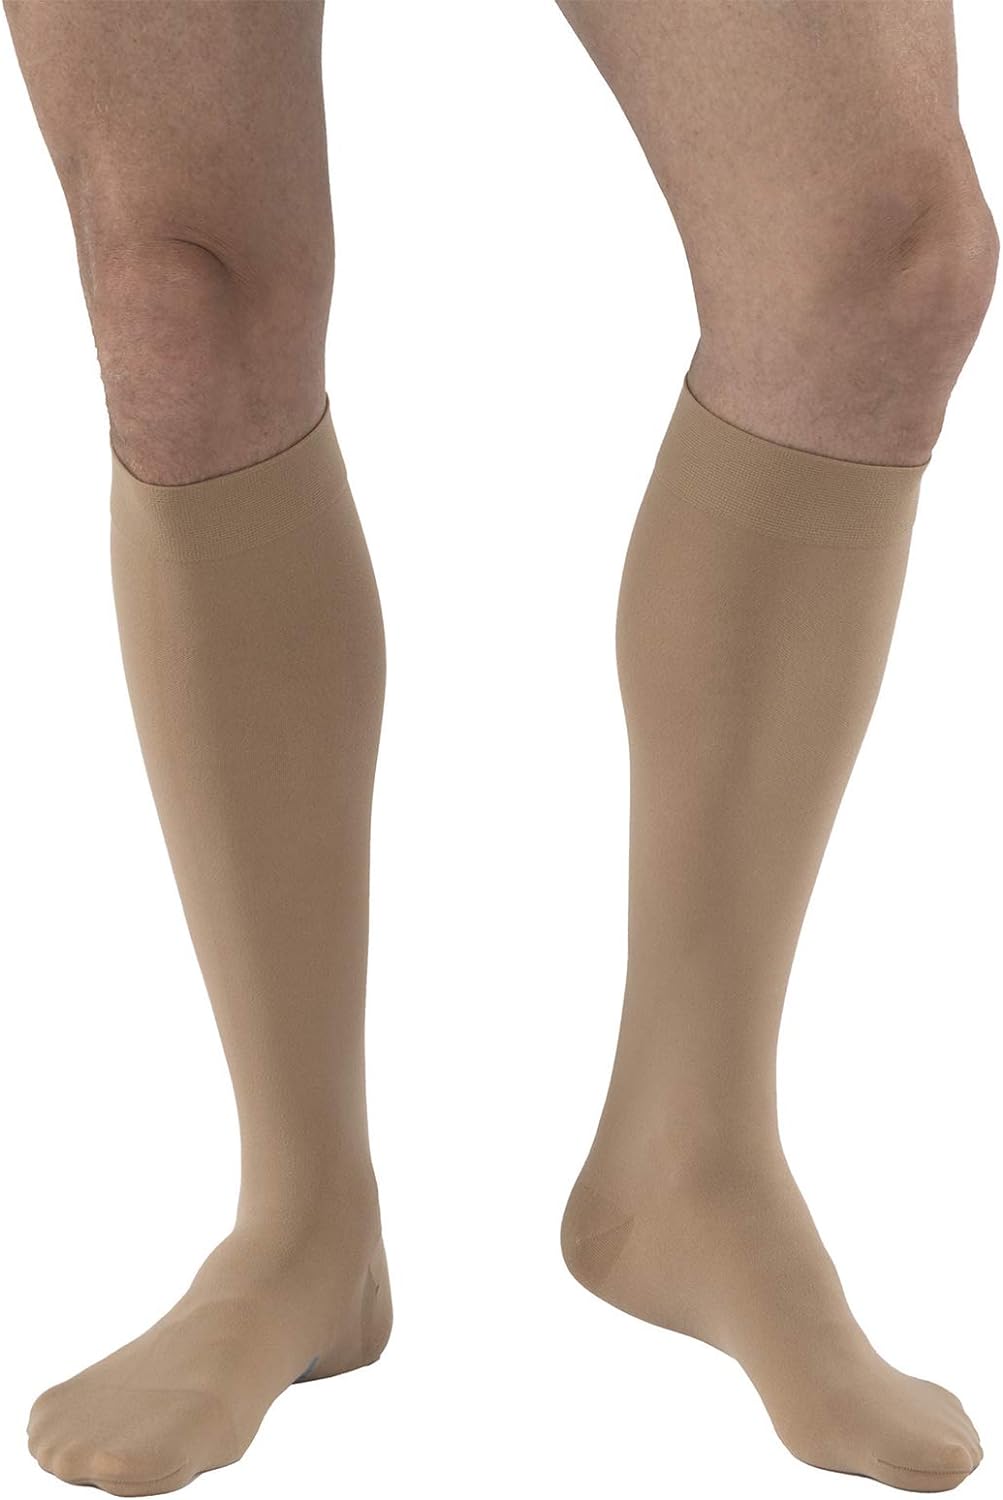 JOBST Relief Knee High 15-20 mmHg Closed Toe Unisex For Men & Women Compression Socks - Choose Your Color & Size